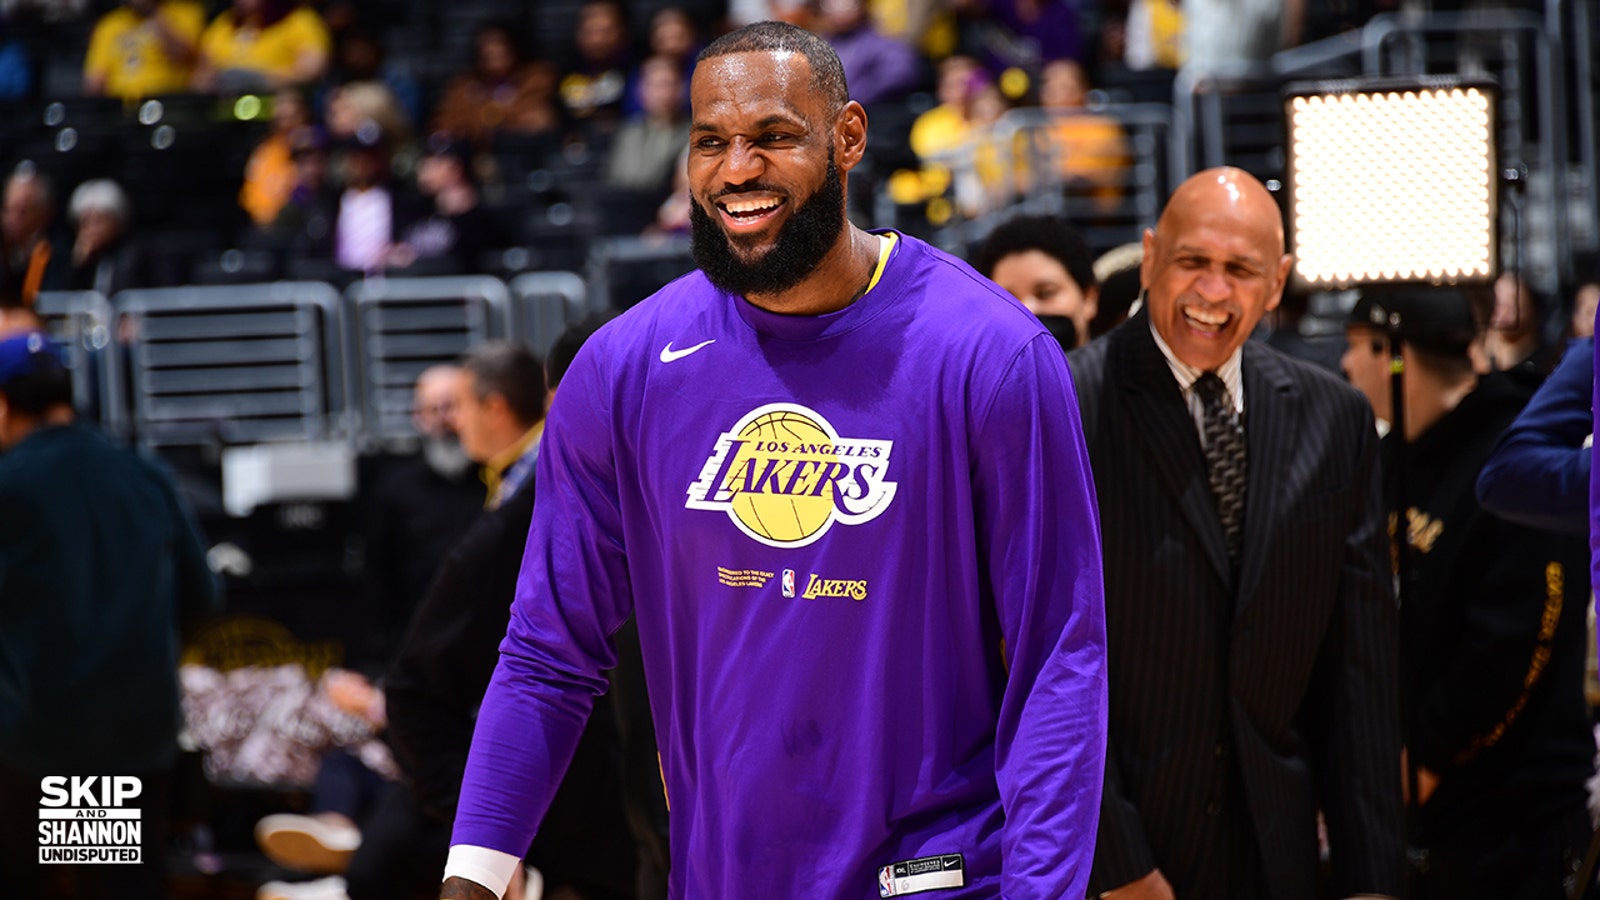 LeBron James: 89 points to pass Kareem Abdul-Jabbar for most all-time 